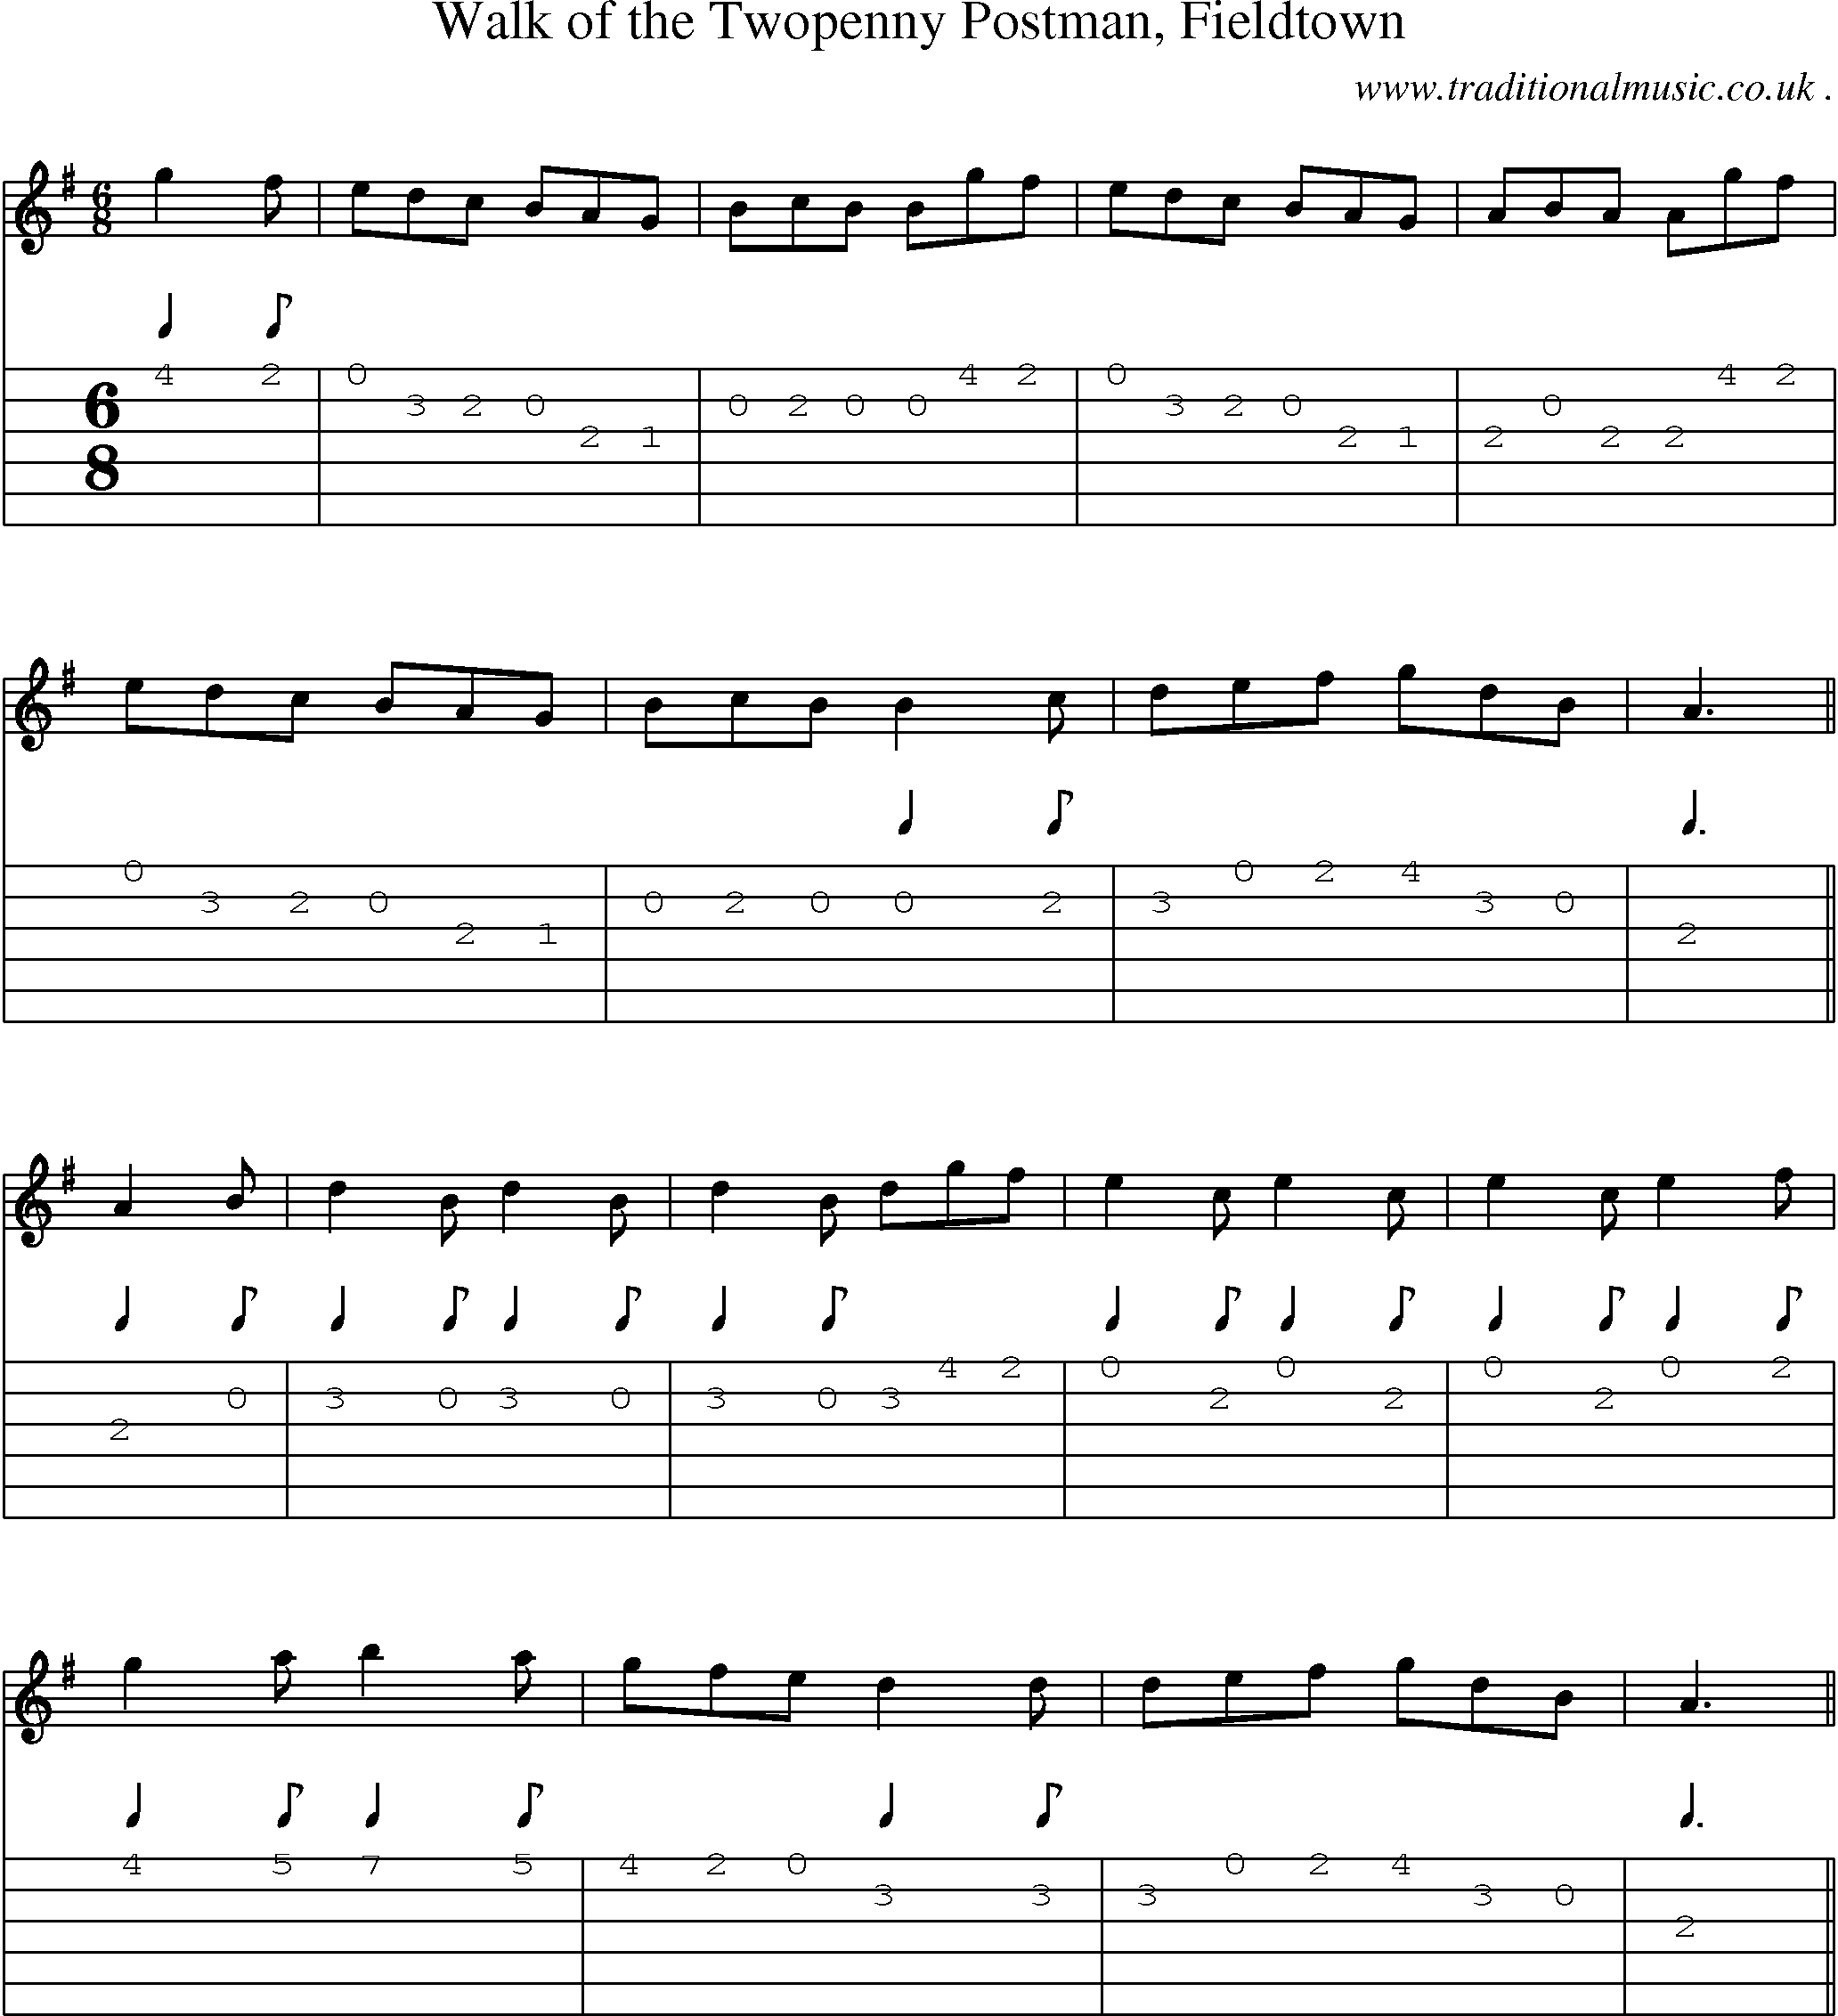 Sheet-Music and Guitar Tabs for Walk Of The Twopenny Postman Fieldtown